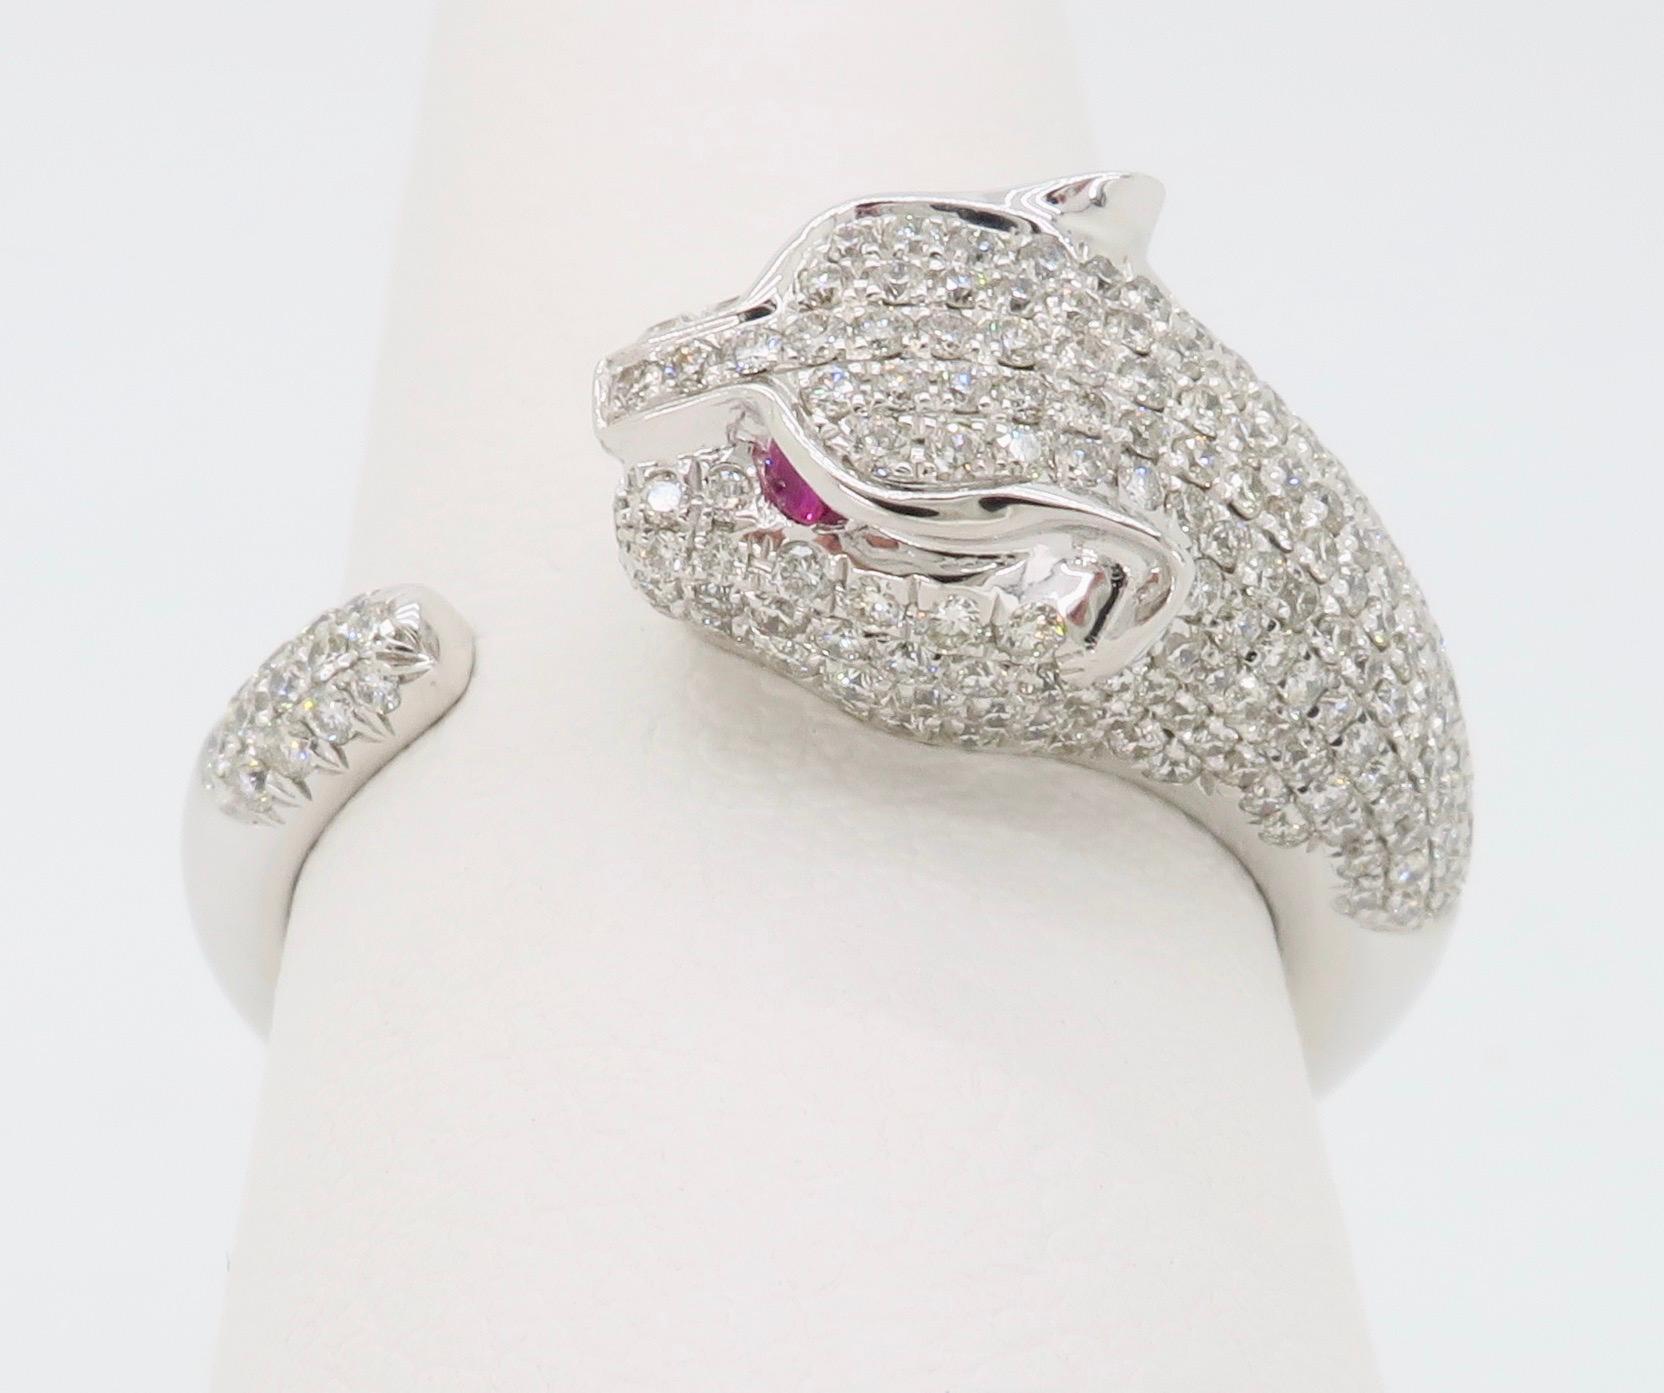 Panther Diamond and Ruby Ring Made in 18 Karat White Gold 5